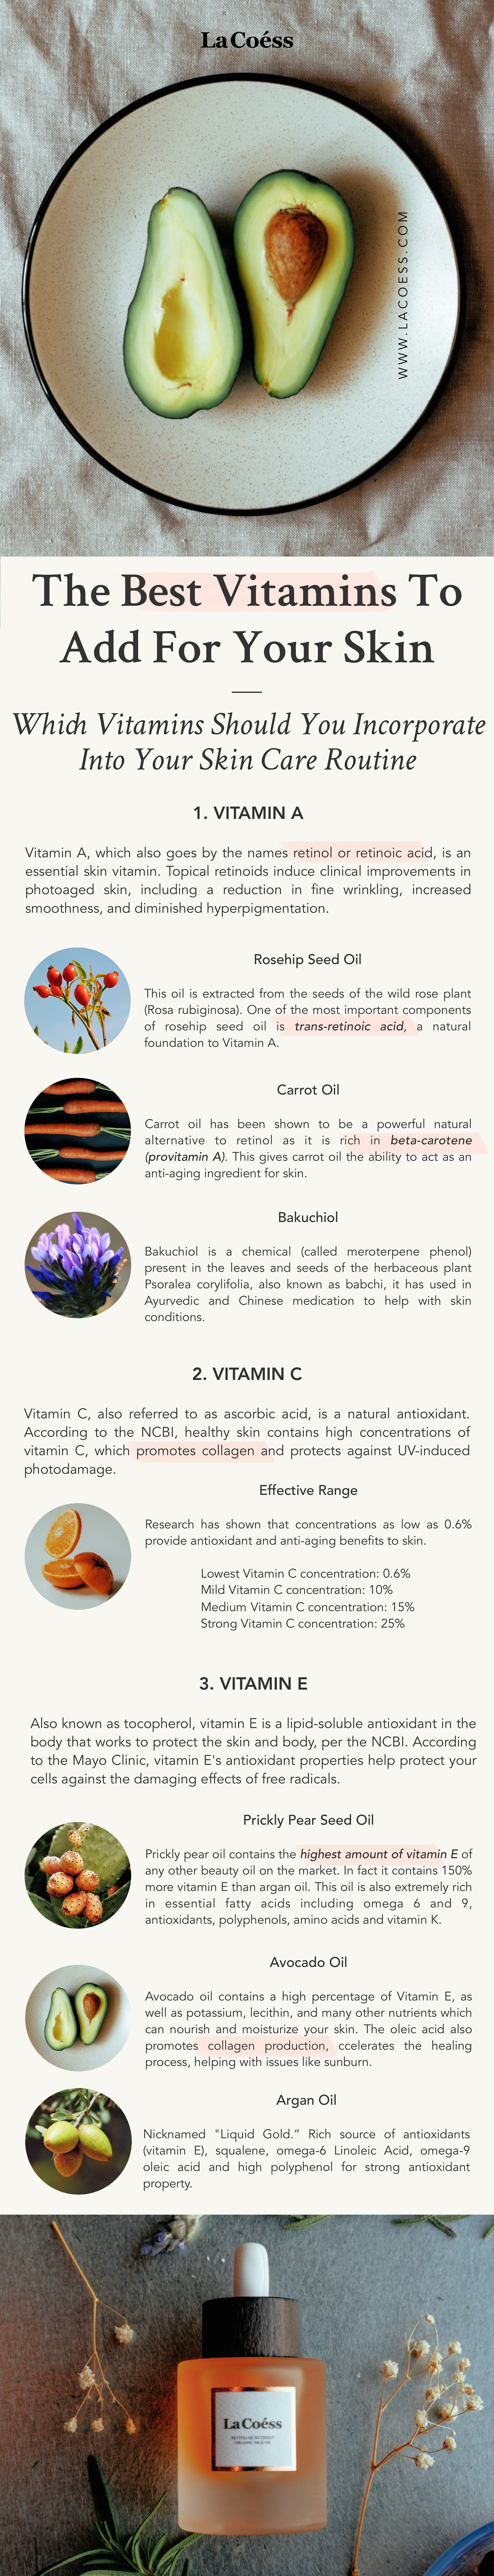 La Coéss the best vitamins to add for your skin